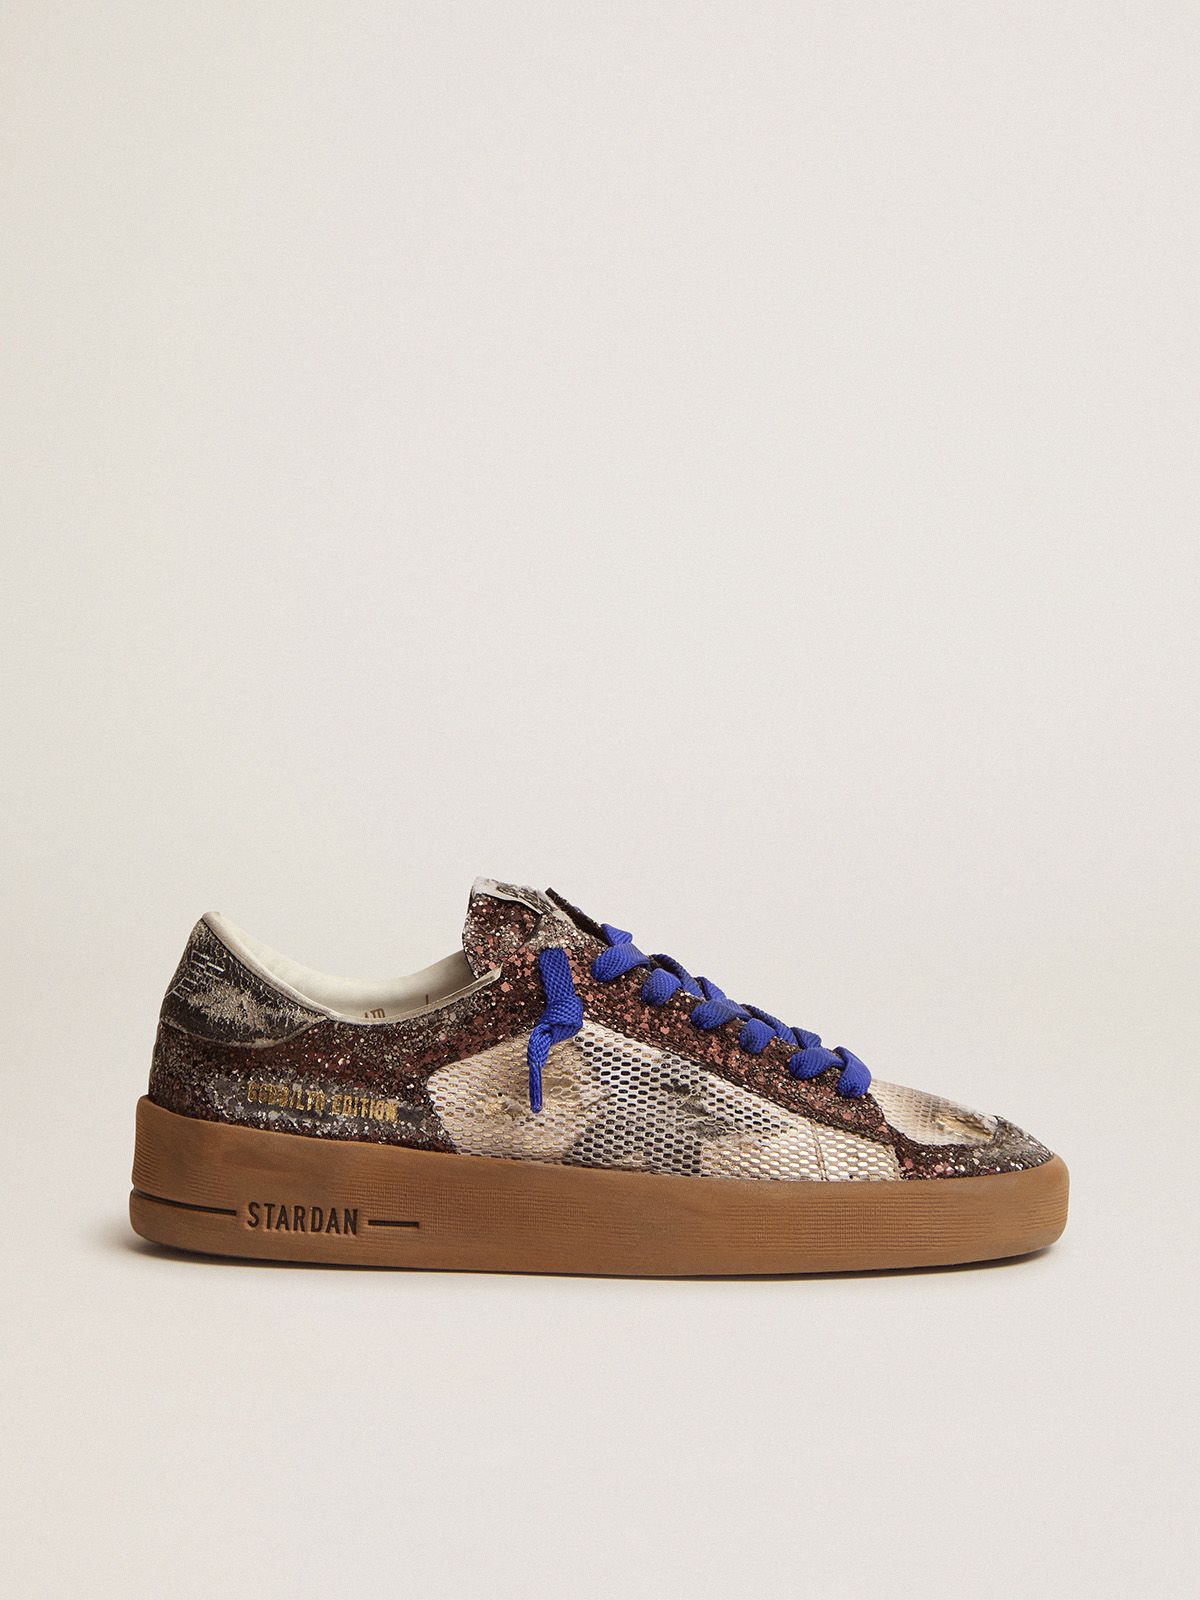 Golden Goose Saldi Uomo Stardan LAB sneakers with brown glitter upper and black crackle leather star